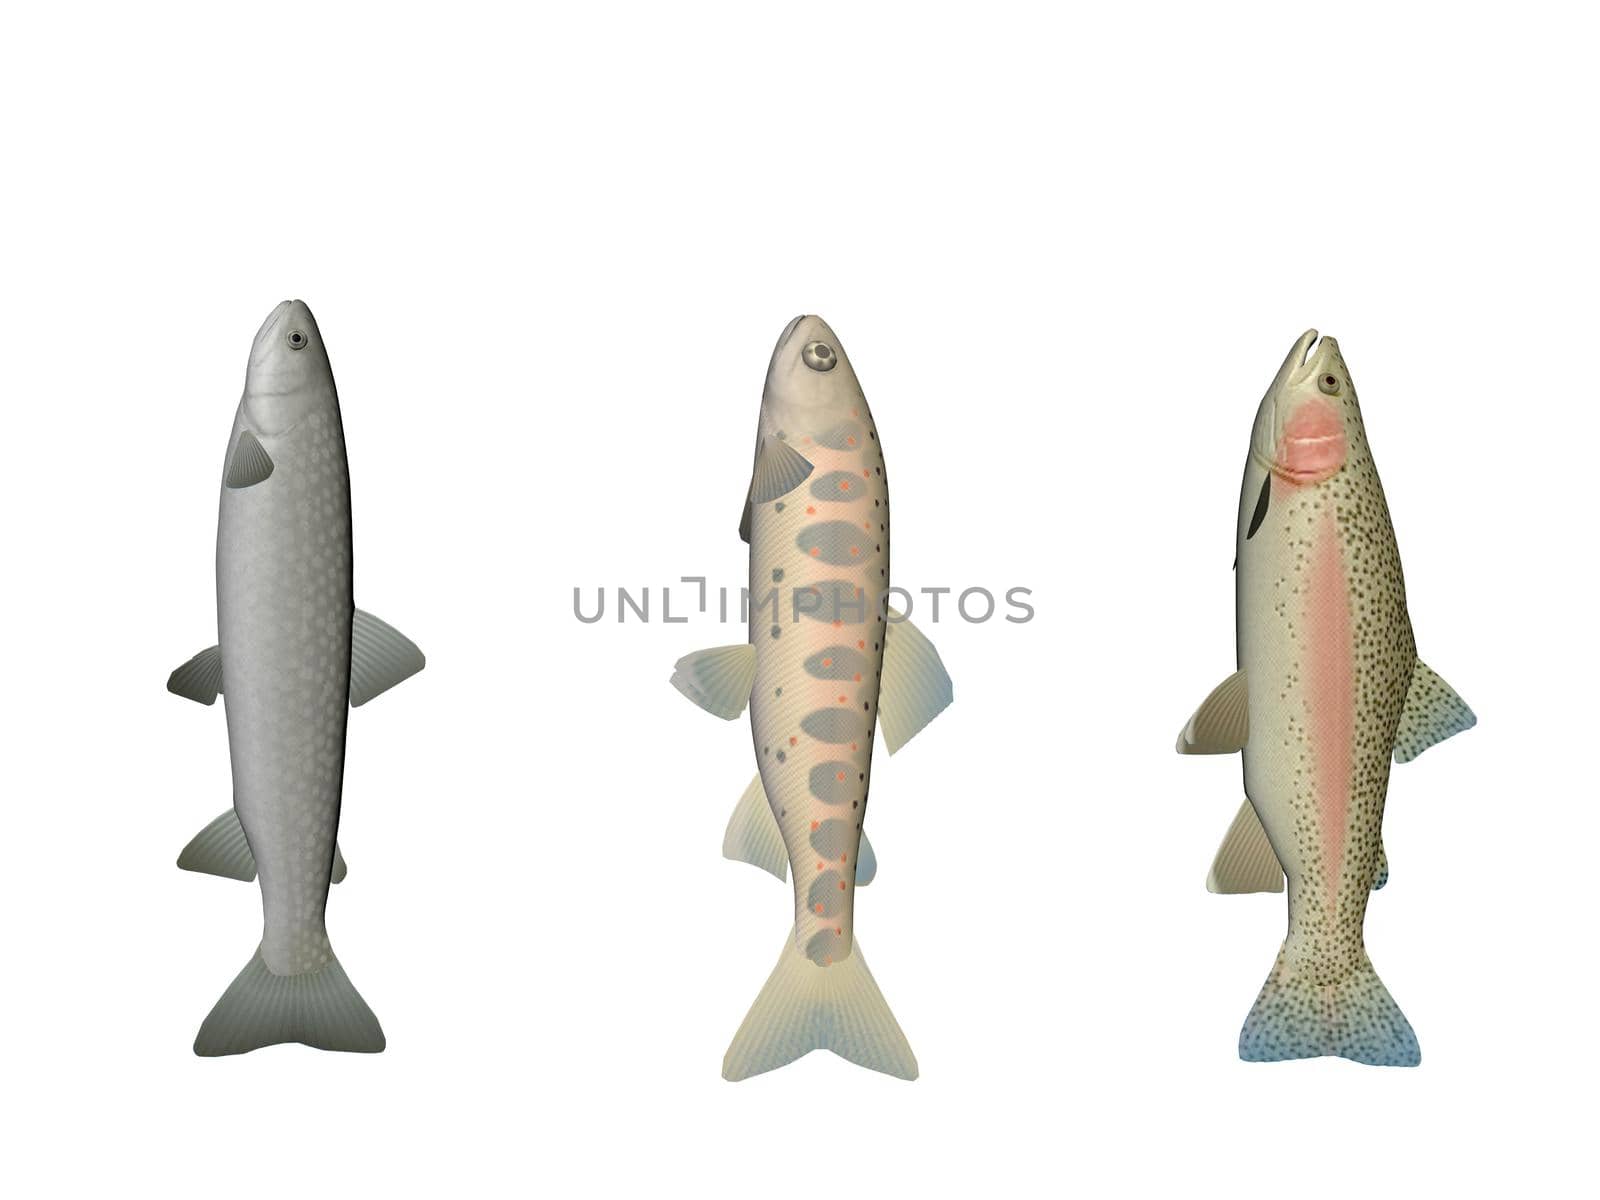 Several fish on a white background - 3d rendering